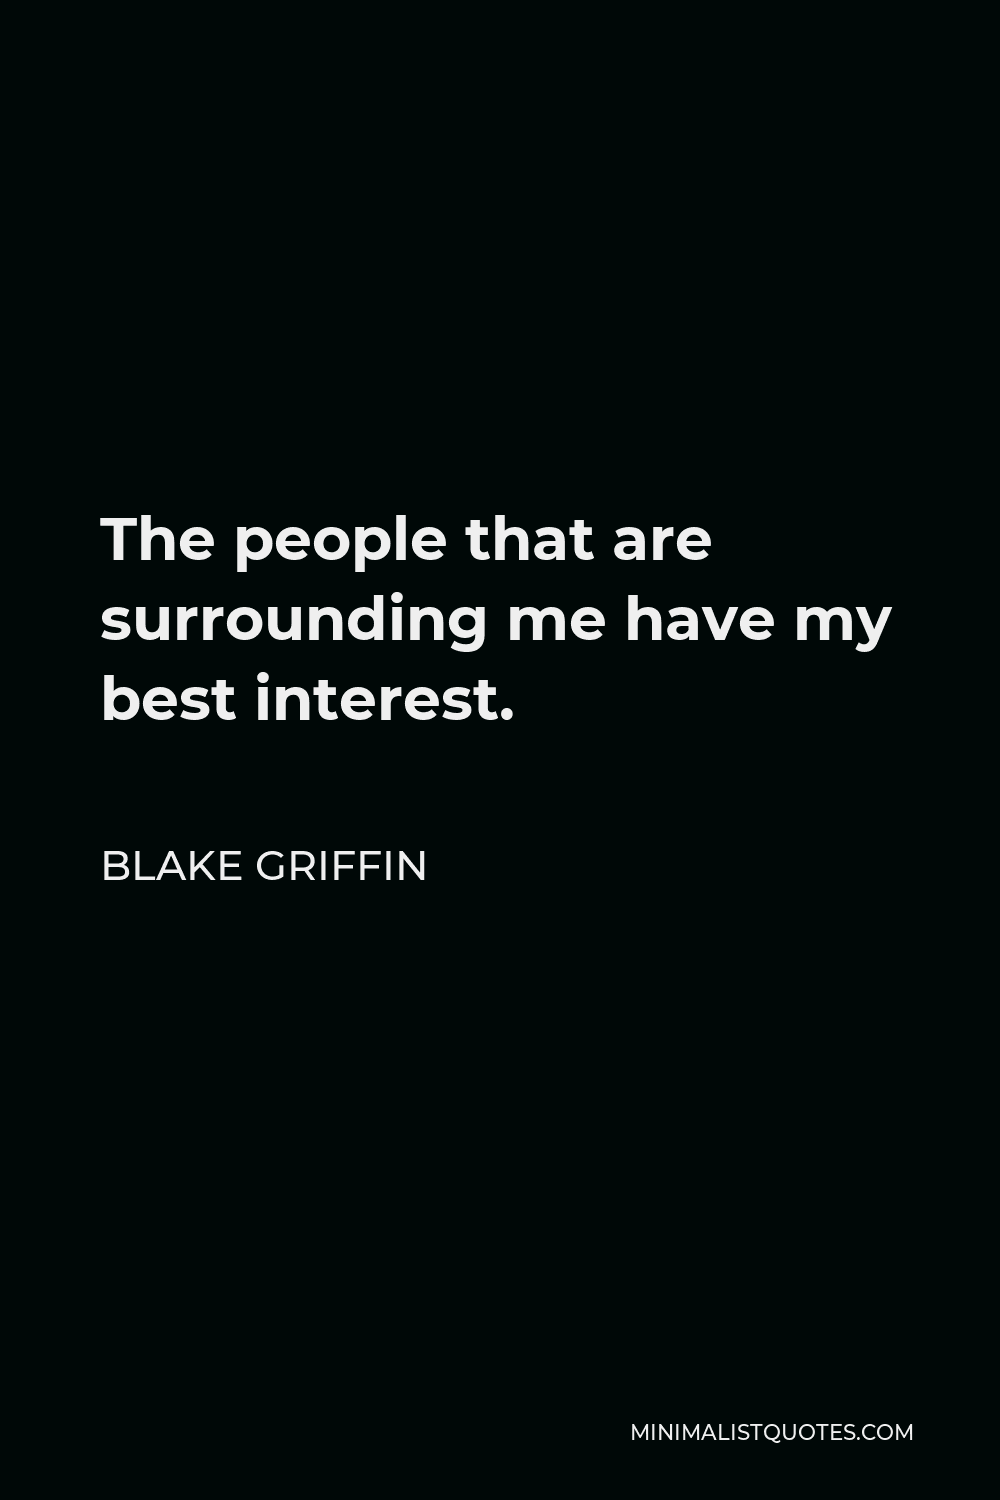 Blake Griffin Quote - The people that are surrounding me have my best interest.